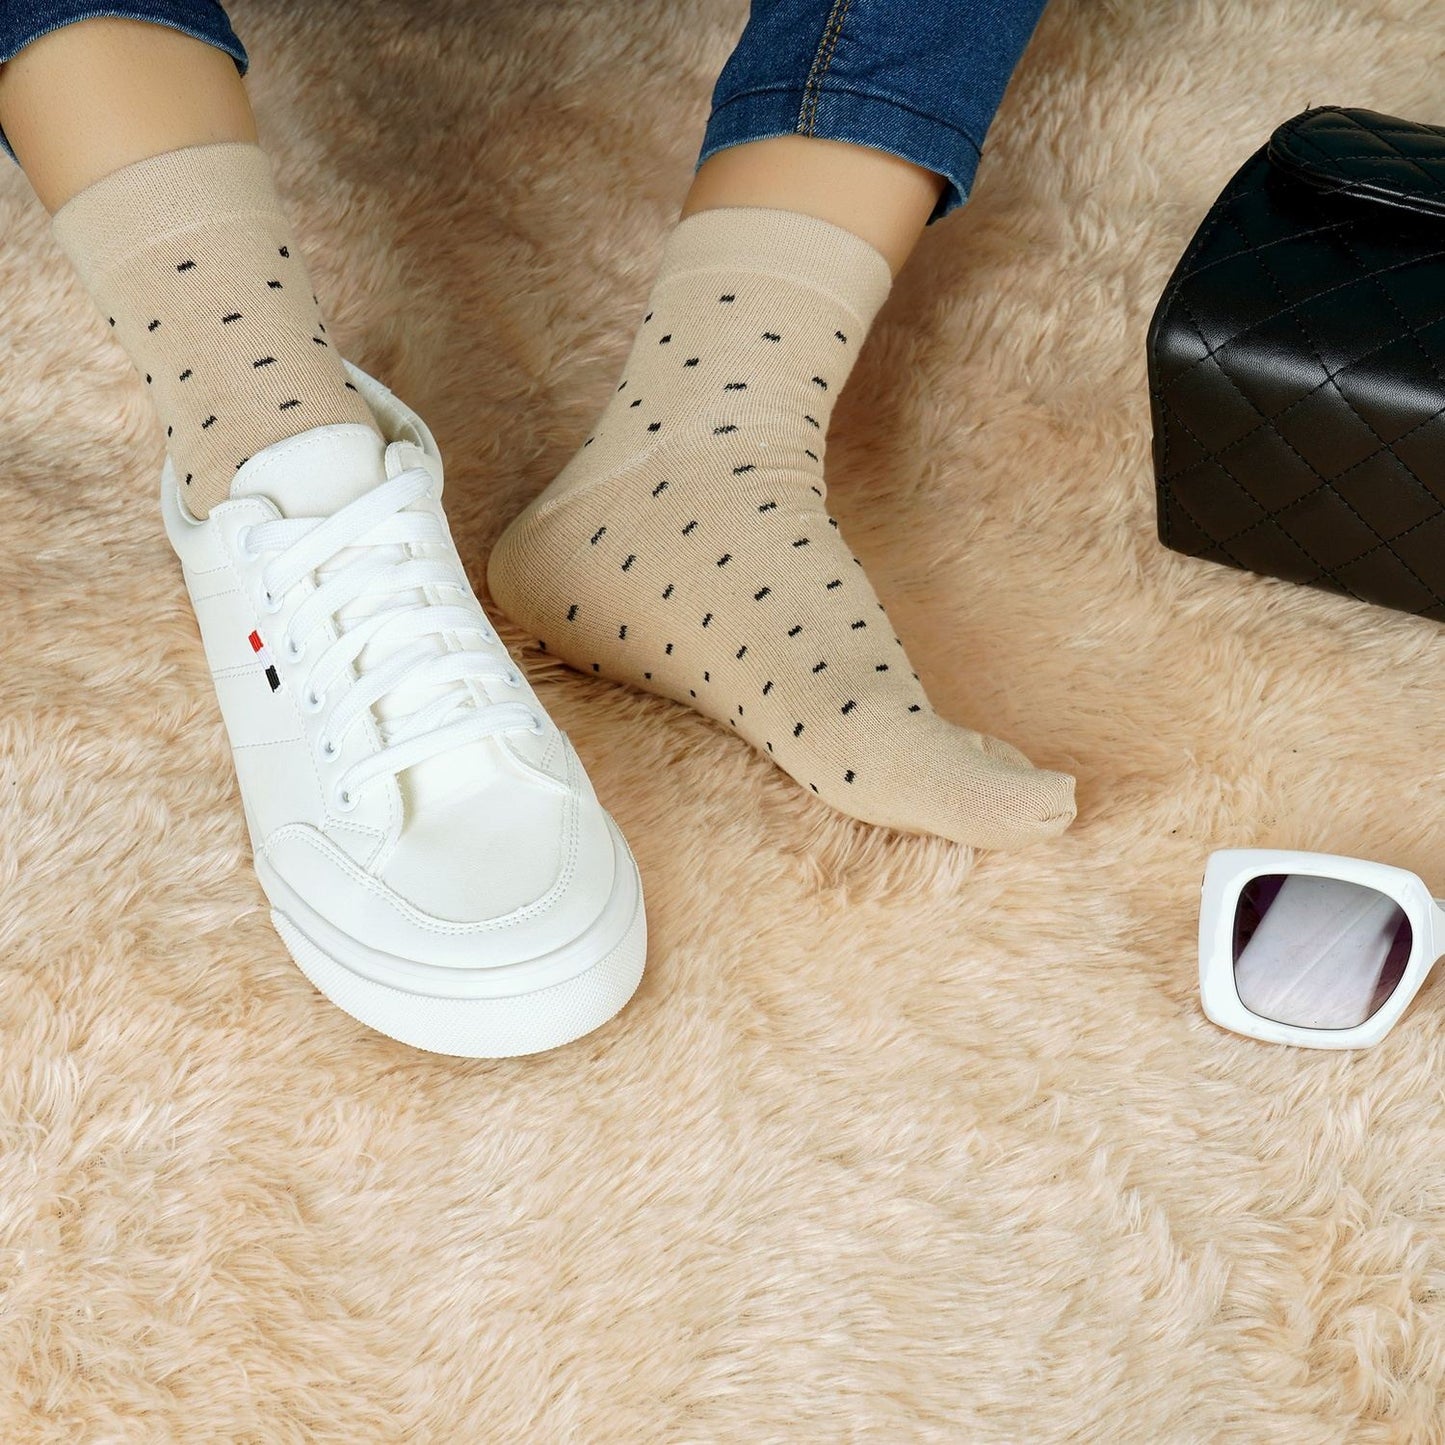 Ankle Thumb Dotted Socks (Peach)